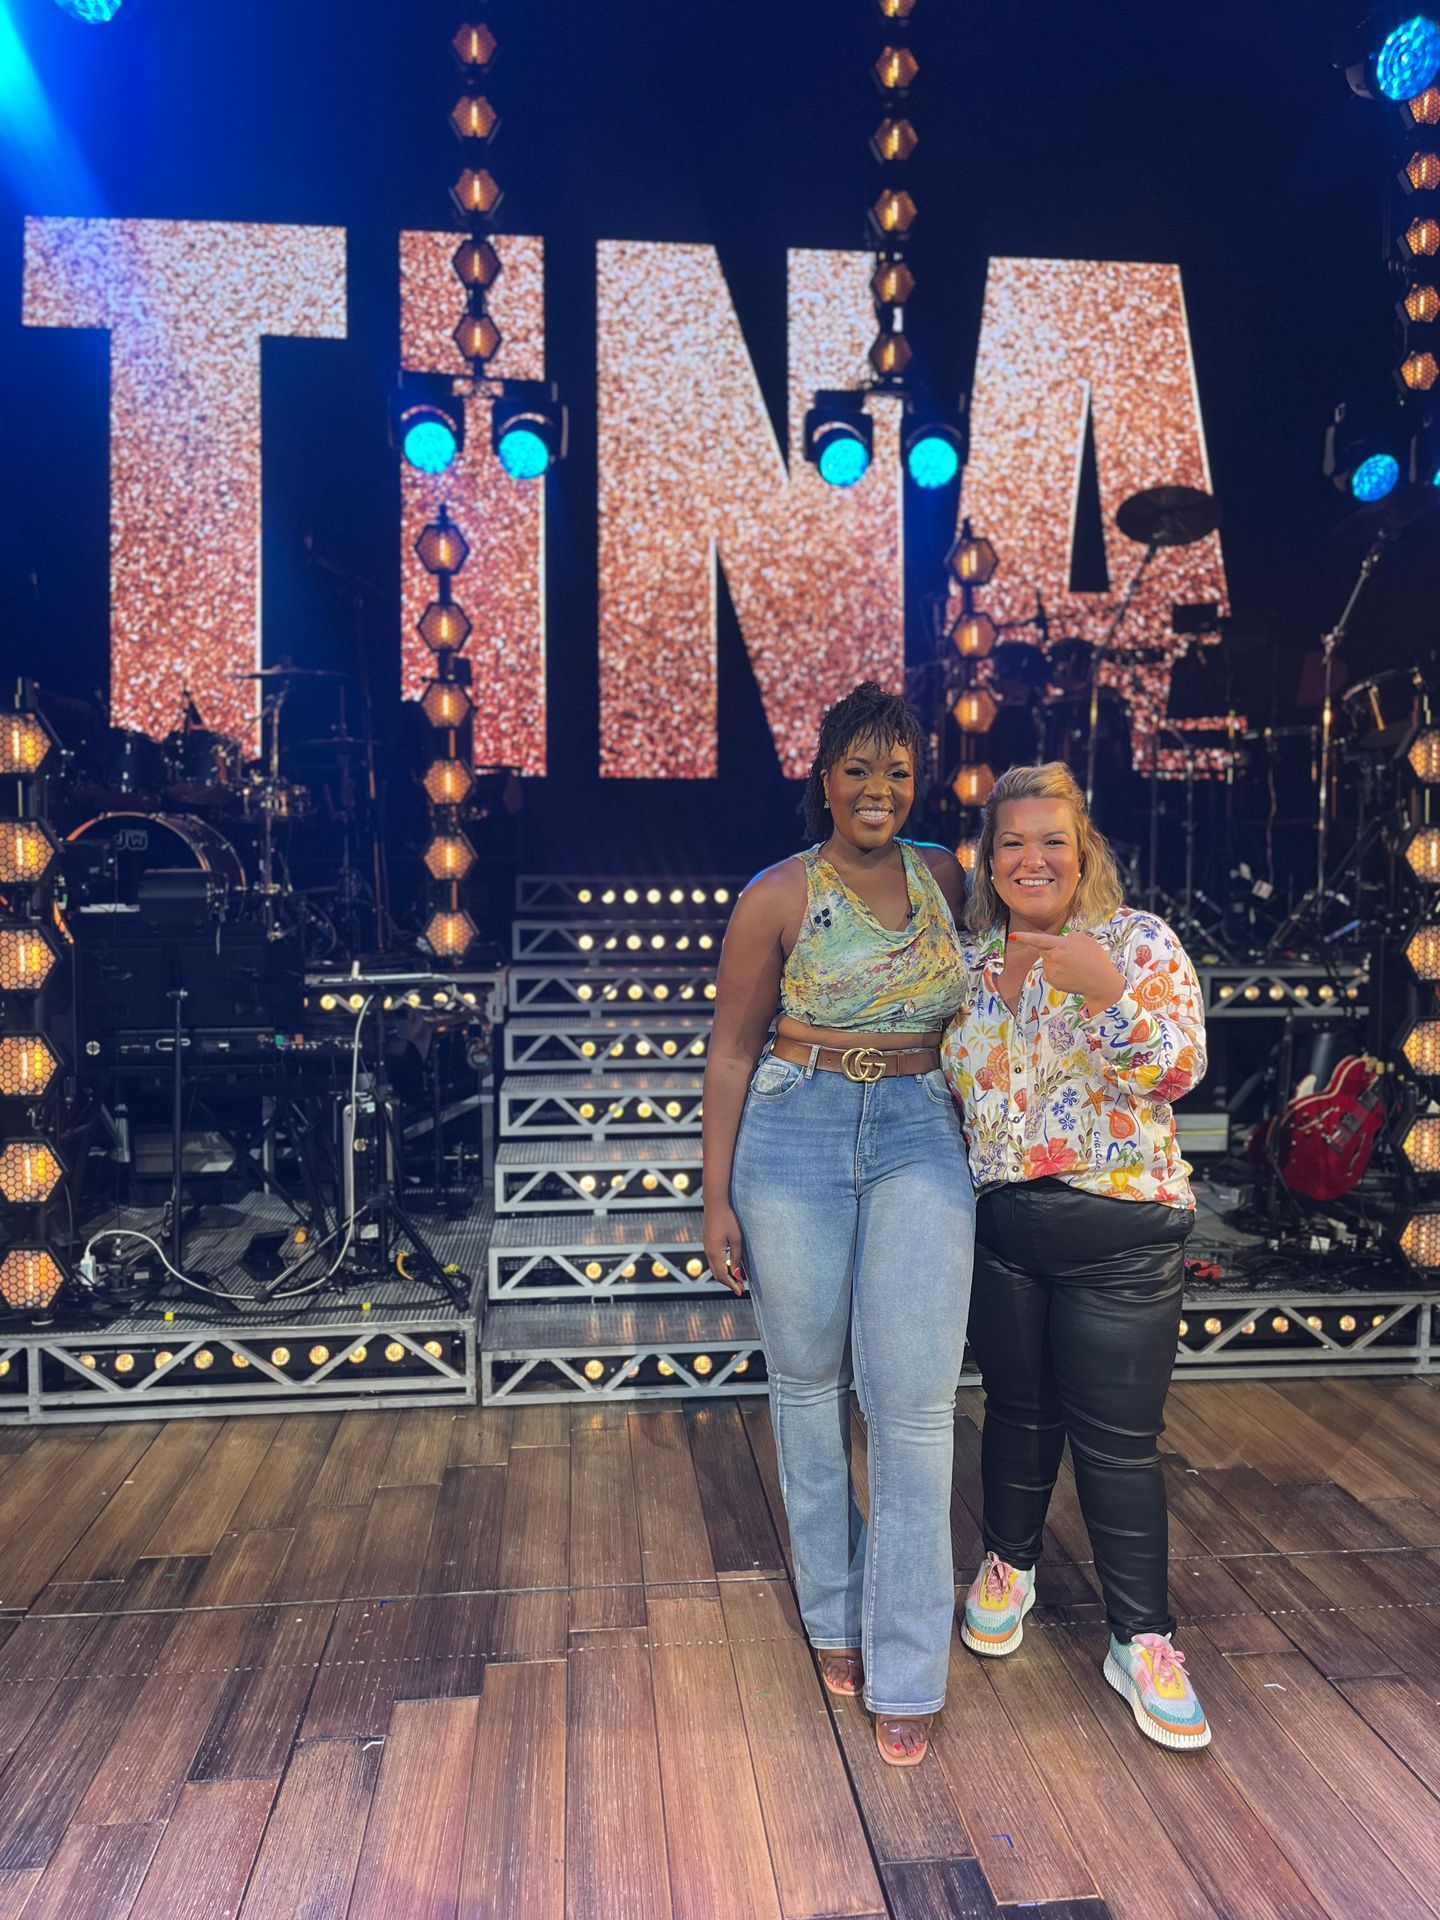 WIN 4 tickets to see TINA – The Tina Turner Musical!